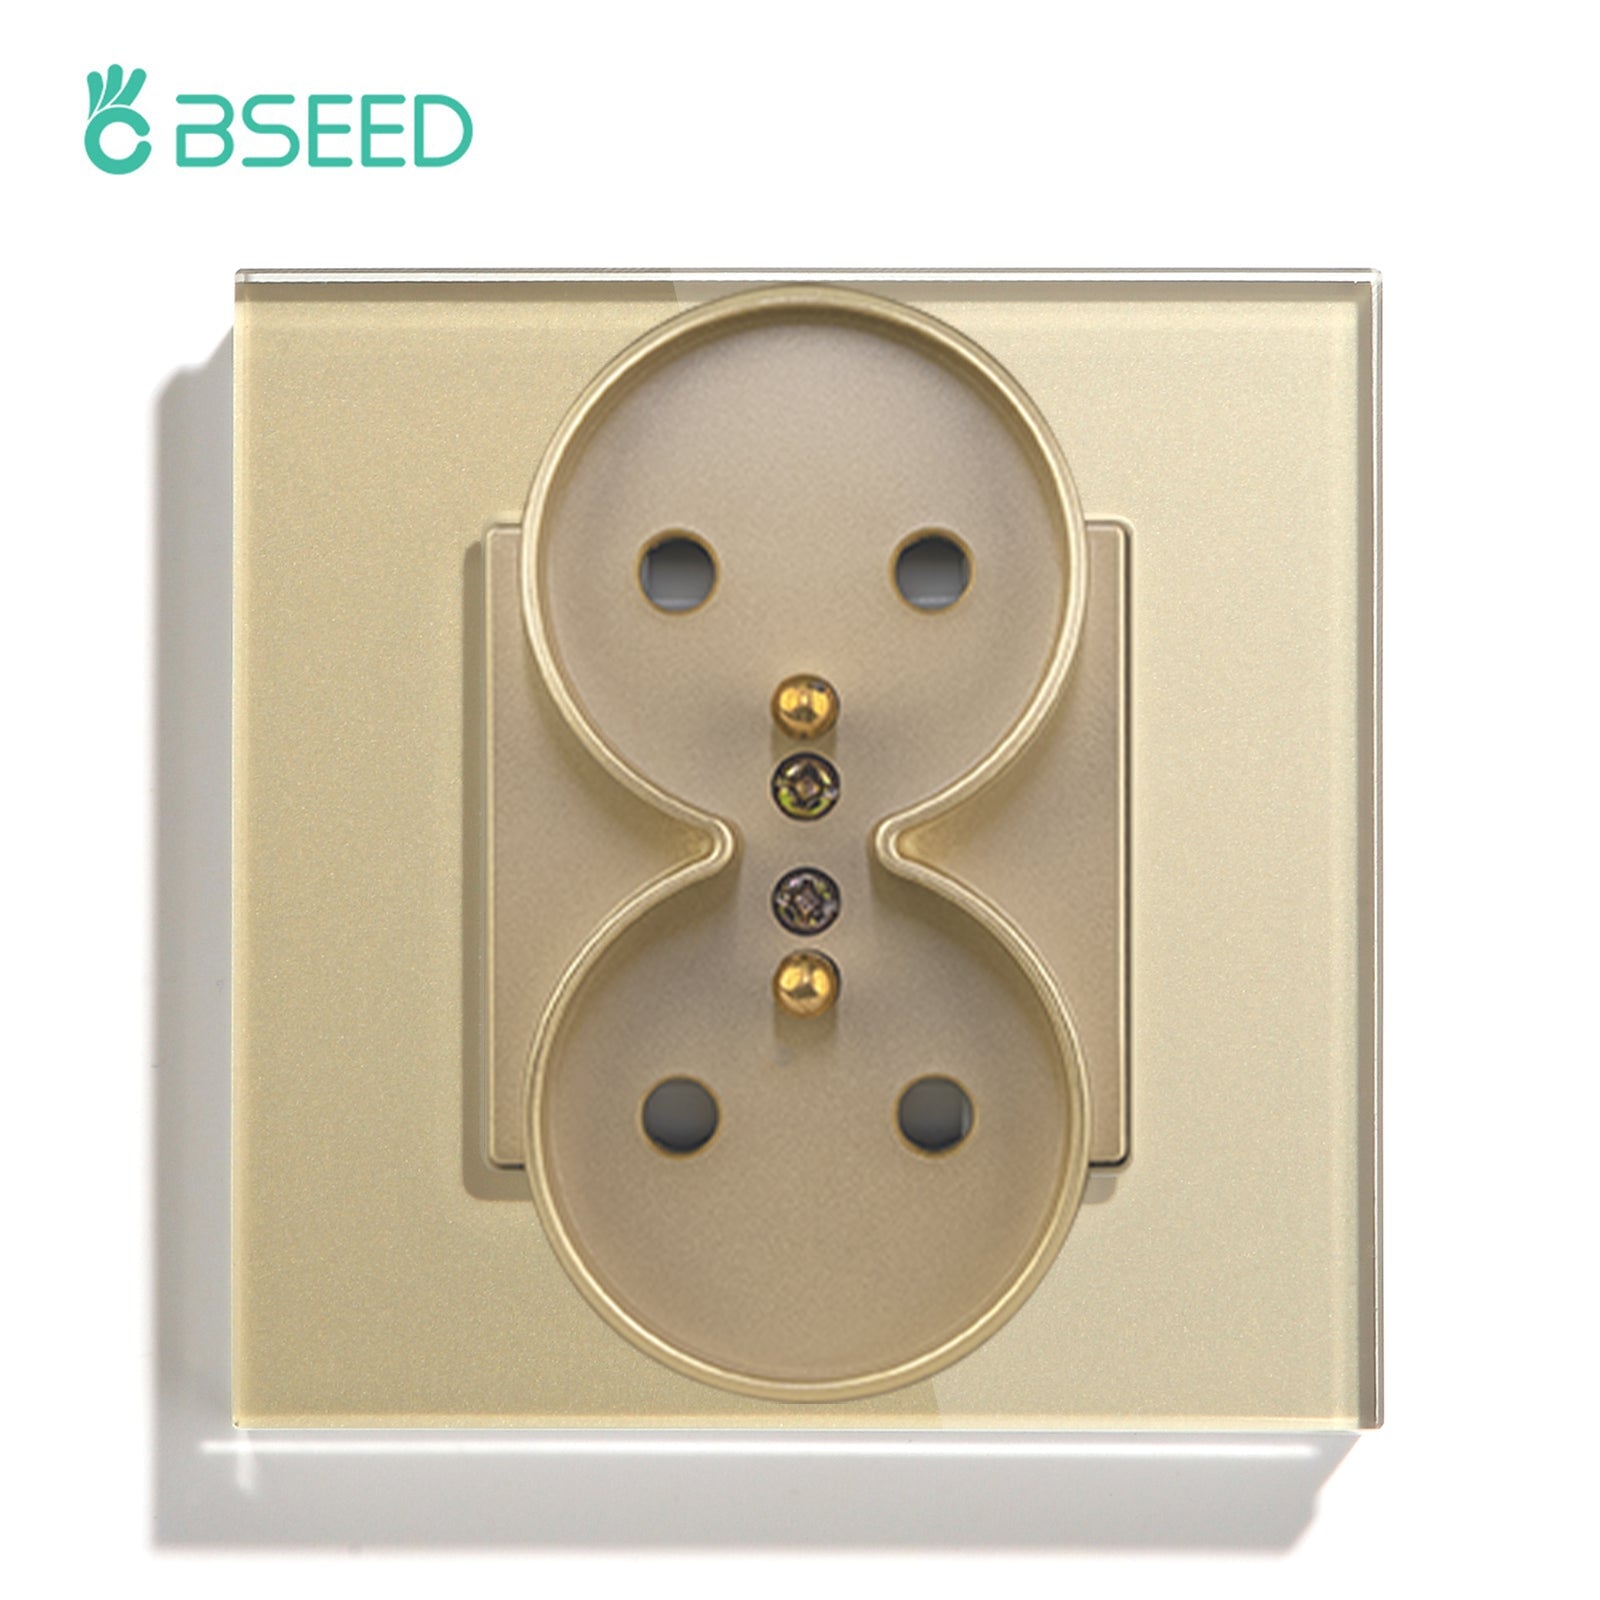 BSEED France Sockets Power Wall Outlet Home Wall Power Sockets Glass Panel Power Outlets & Sockets Bseedswitch Glod 